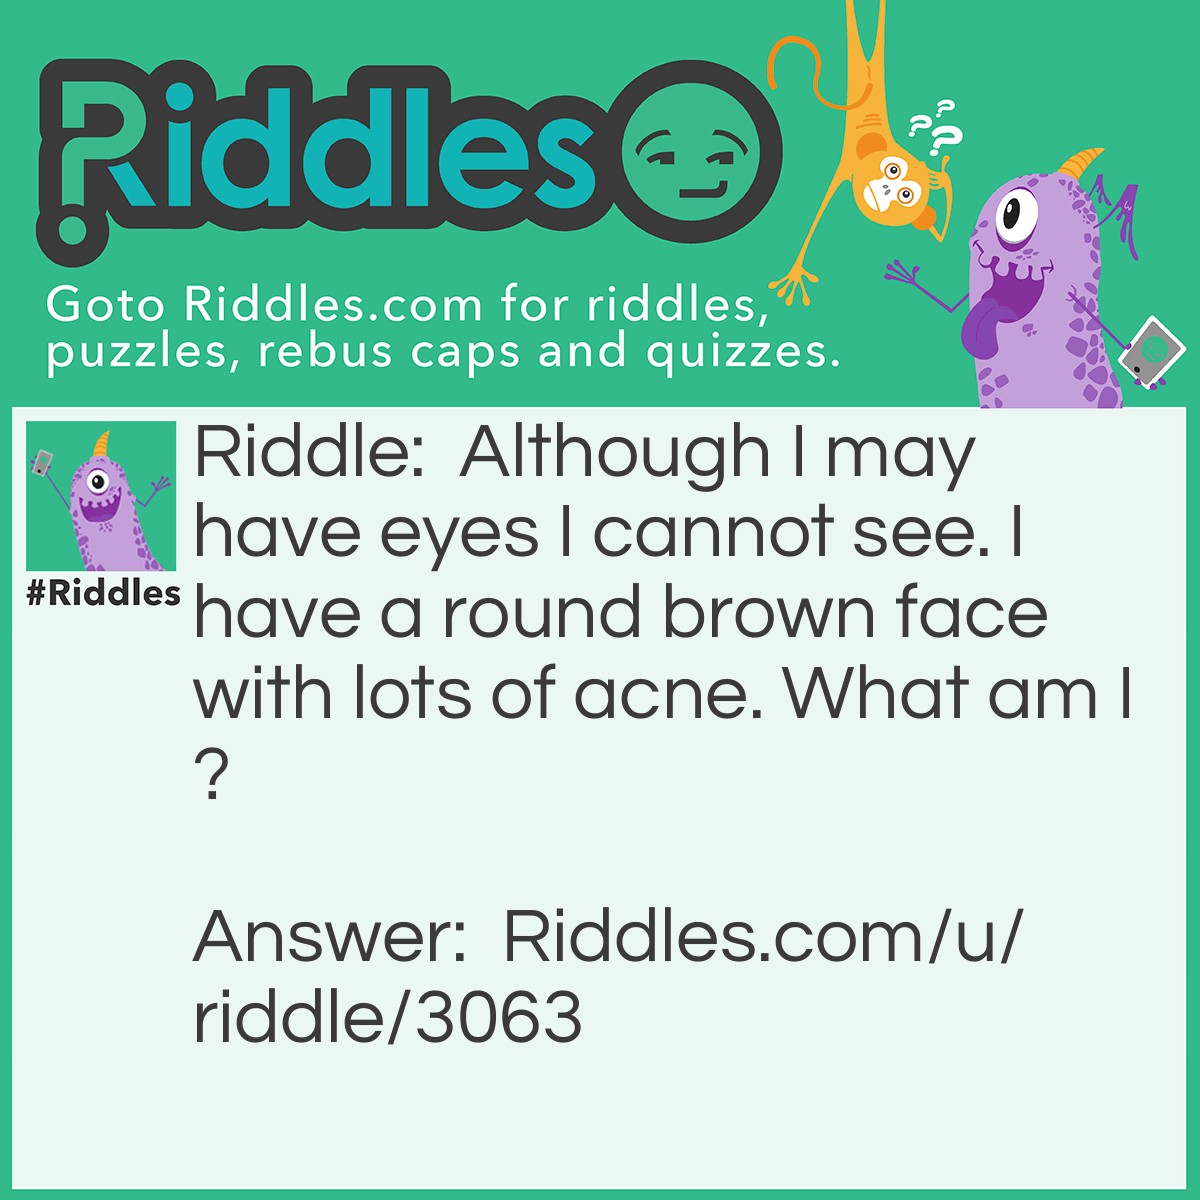 Riddle: Although I may have eyes I cannot see. I have a round brown face with lots of acne. What am I? Answer: A potato.